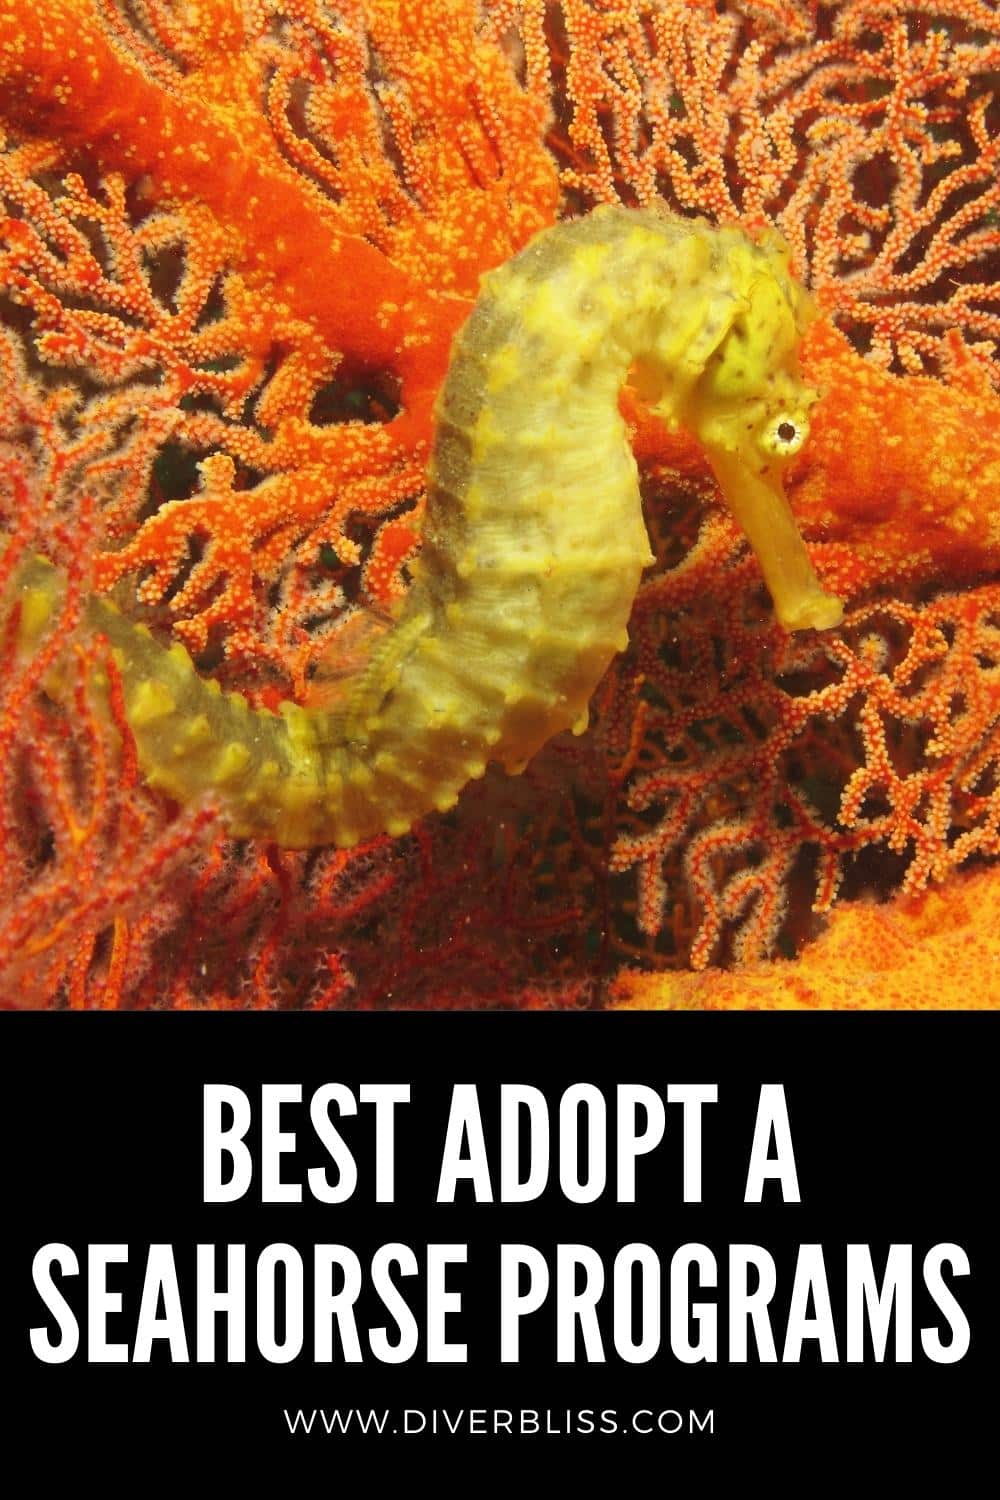 best adopt a seahorse programs you can give as gifts for seahorse lovers